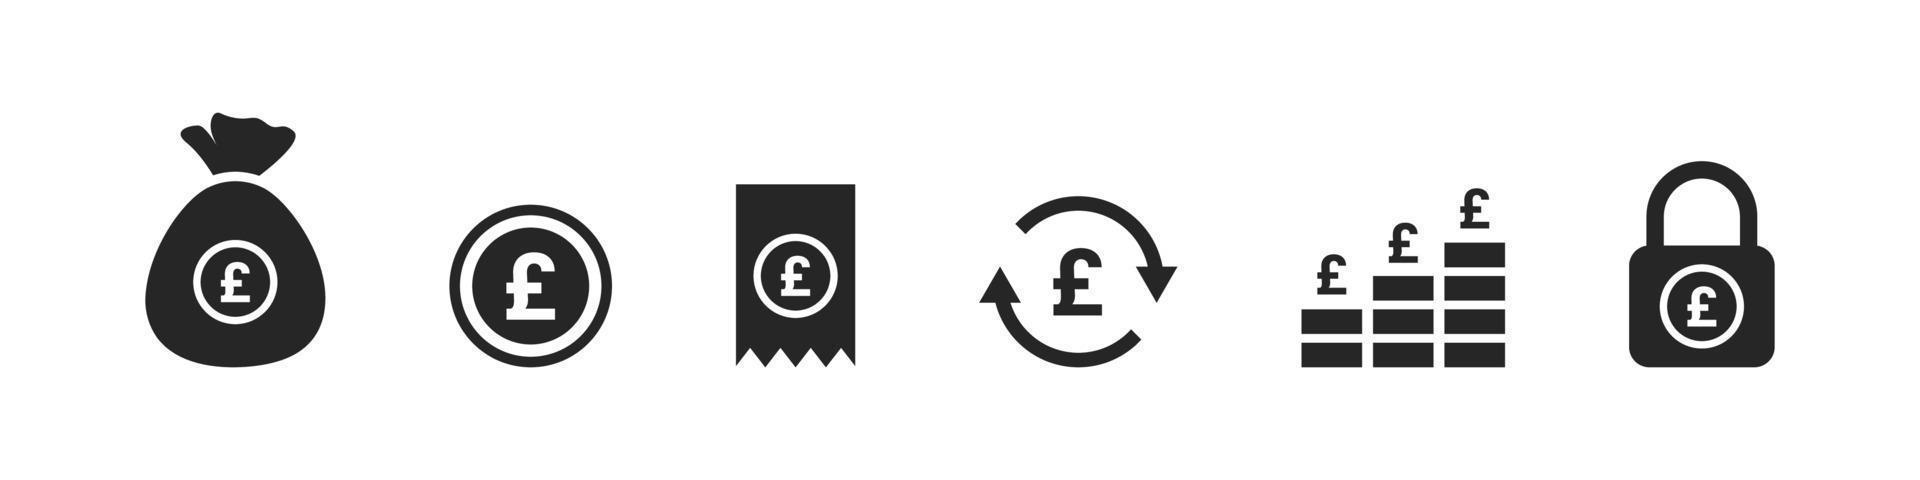 Currency icons. Pound Sterling icons. Money signs. Finansial vector icons. Vector illustration